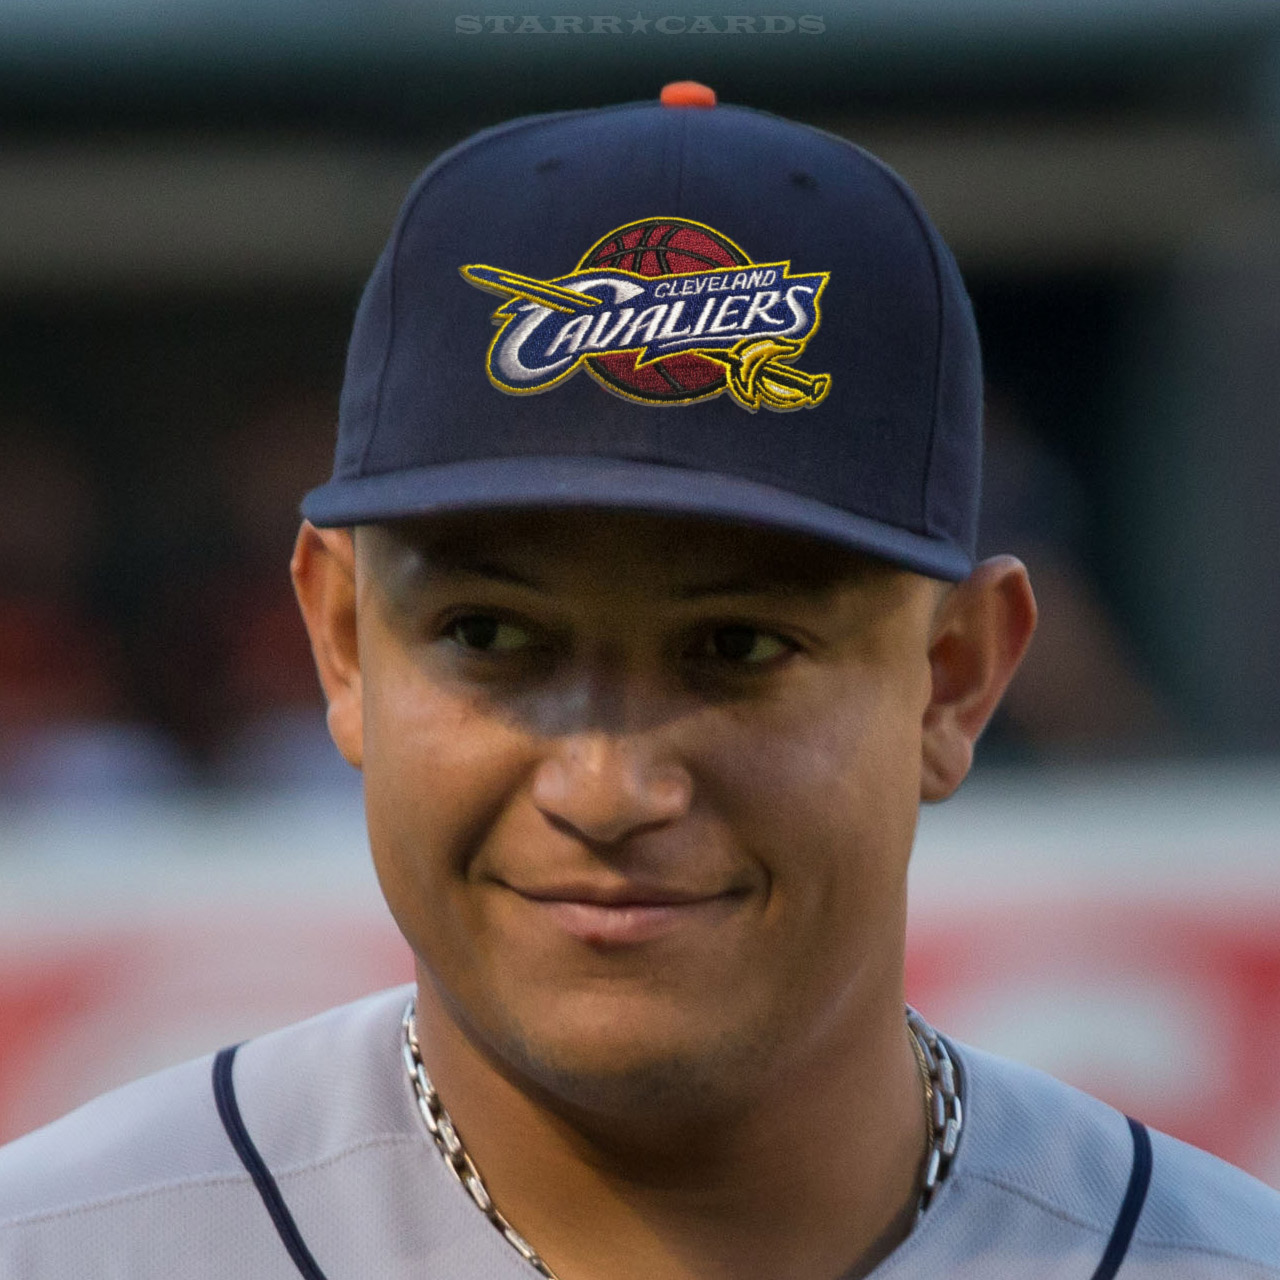 Miguel Cabrera ready to go for Cleveland Cavaliers